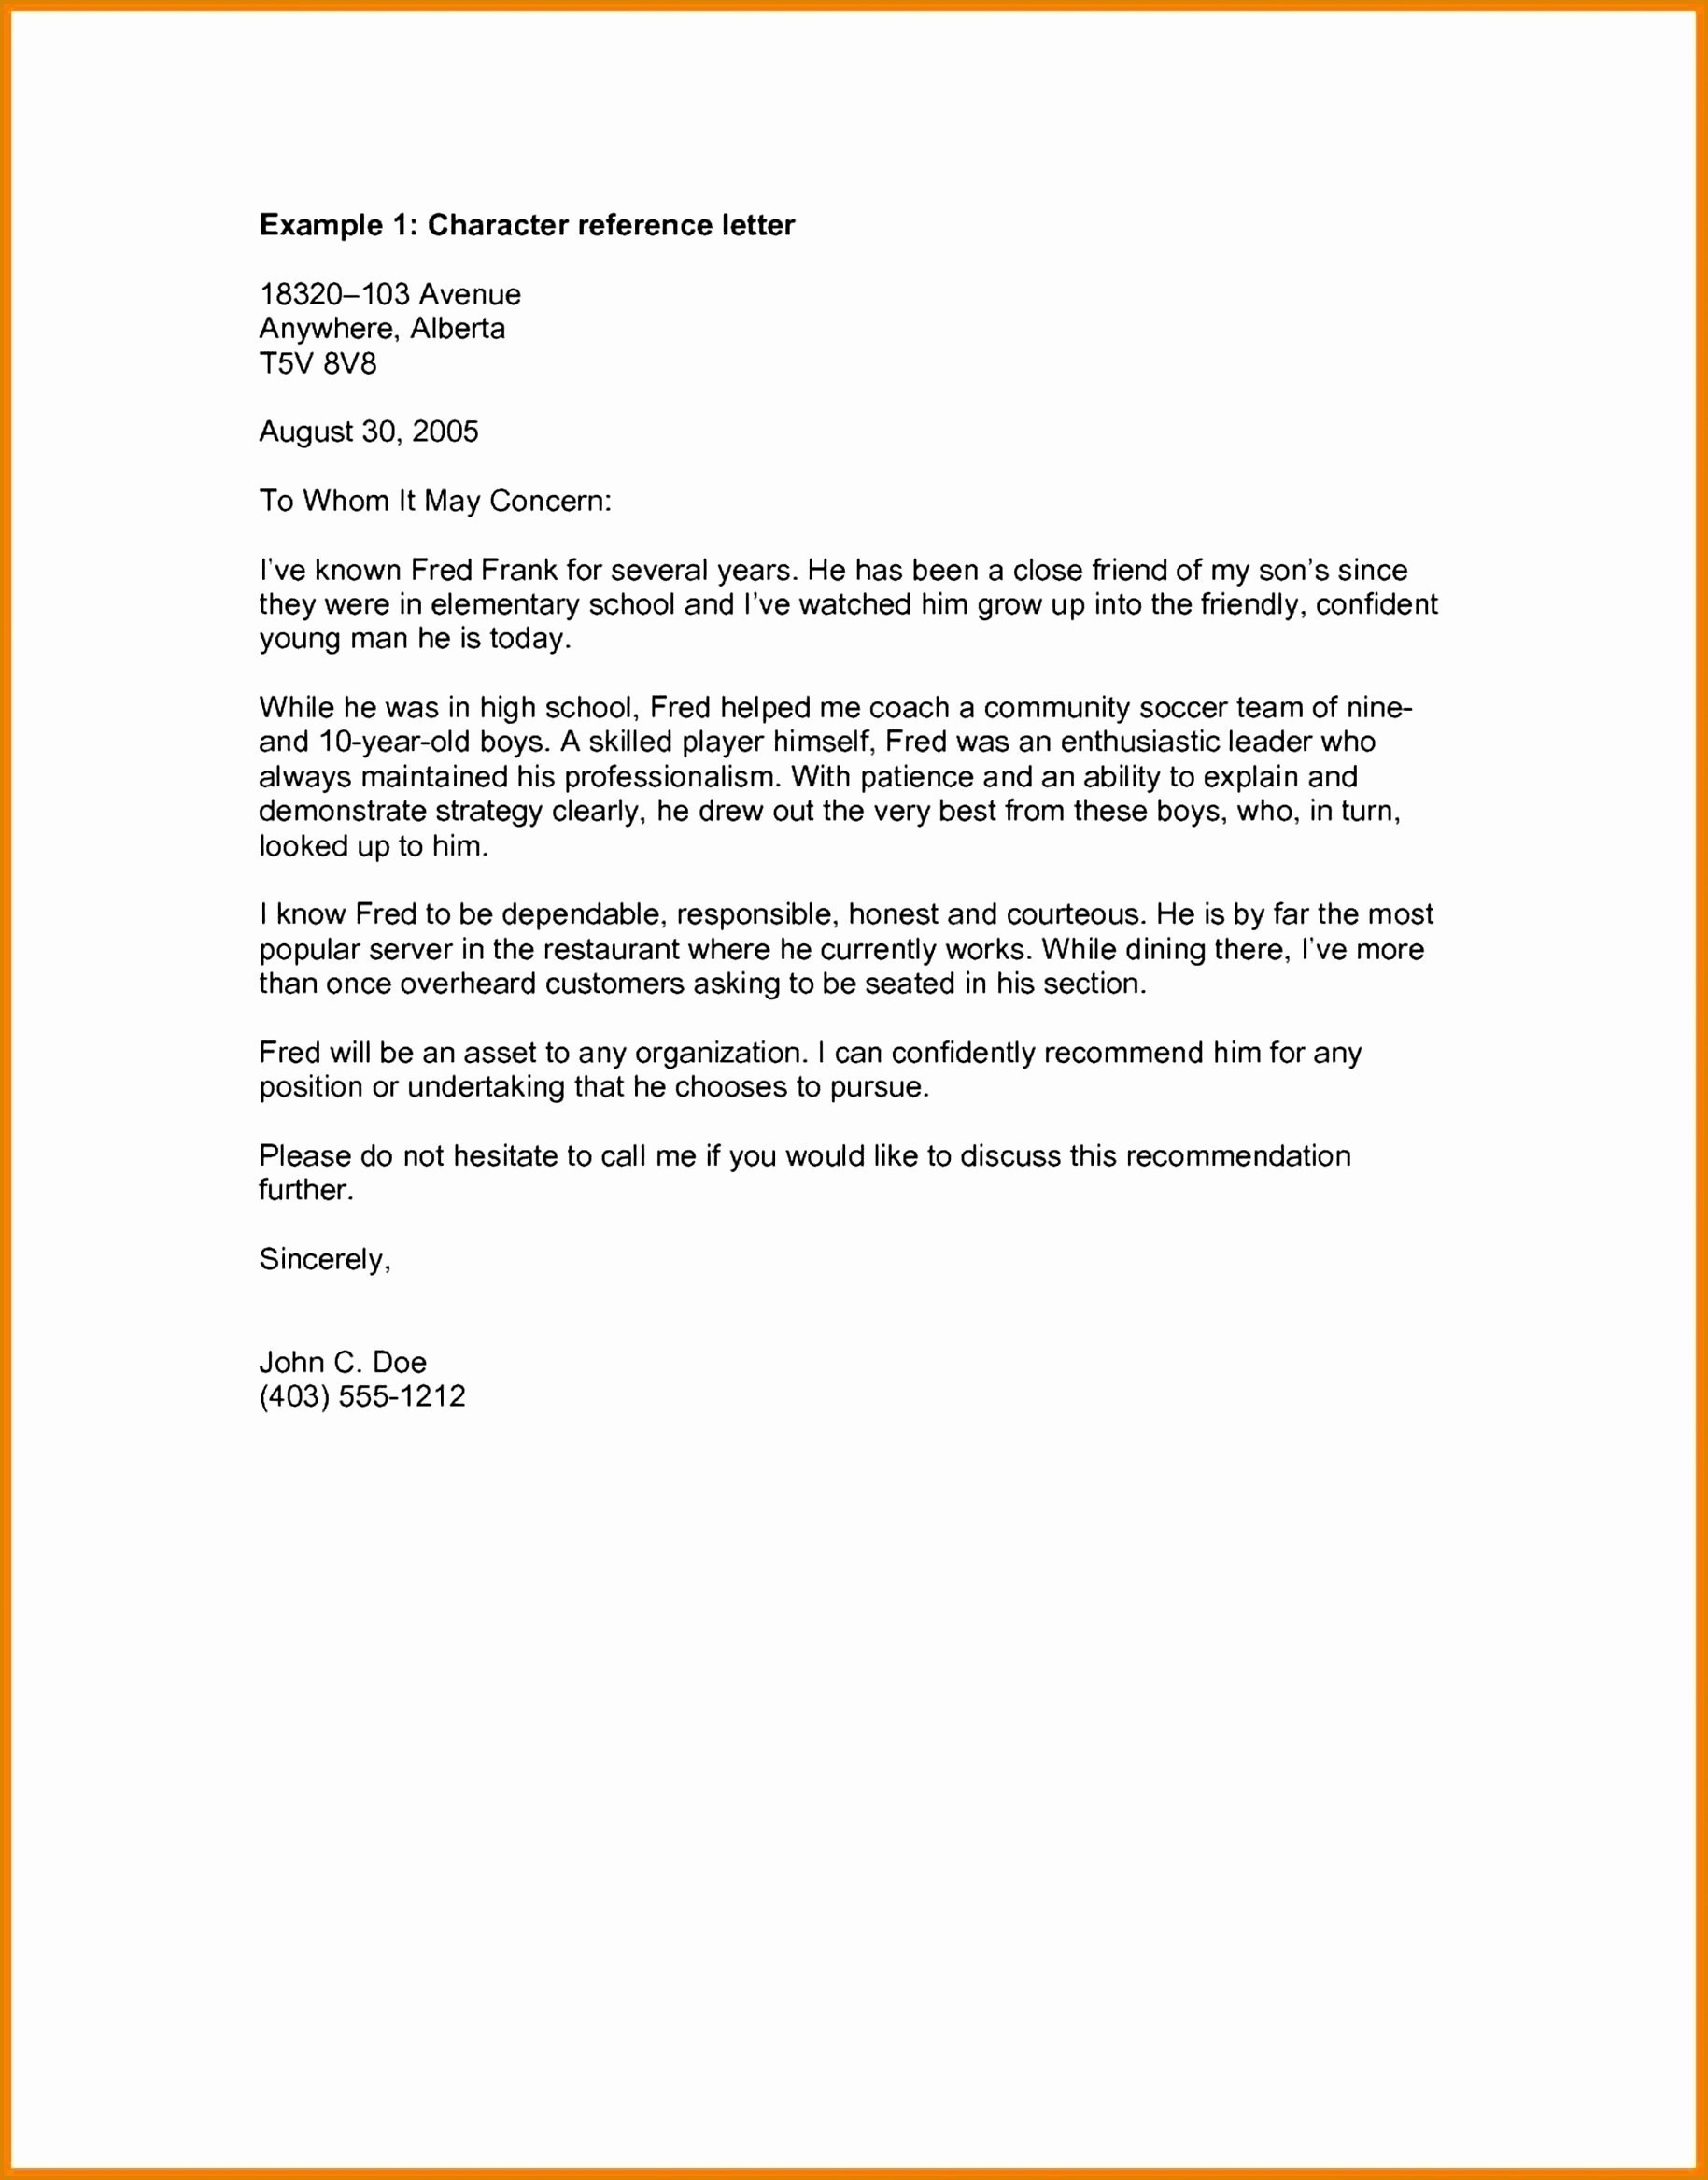 Letter Of Recommendation Request Template - Plaint Letter Template Refund Fresh Template References Letter